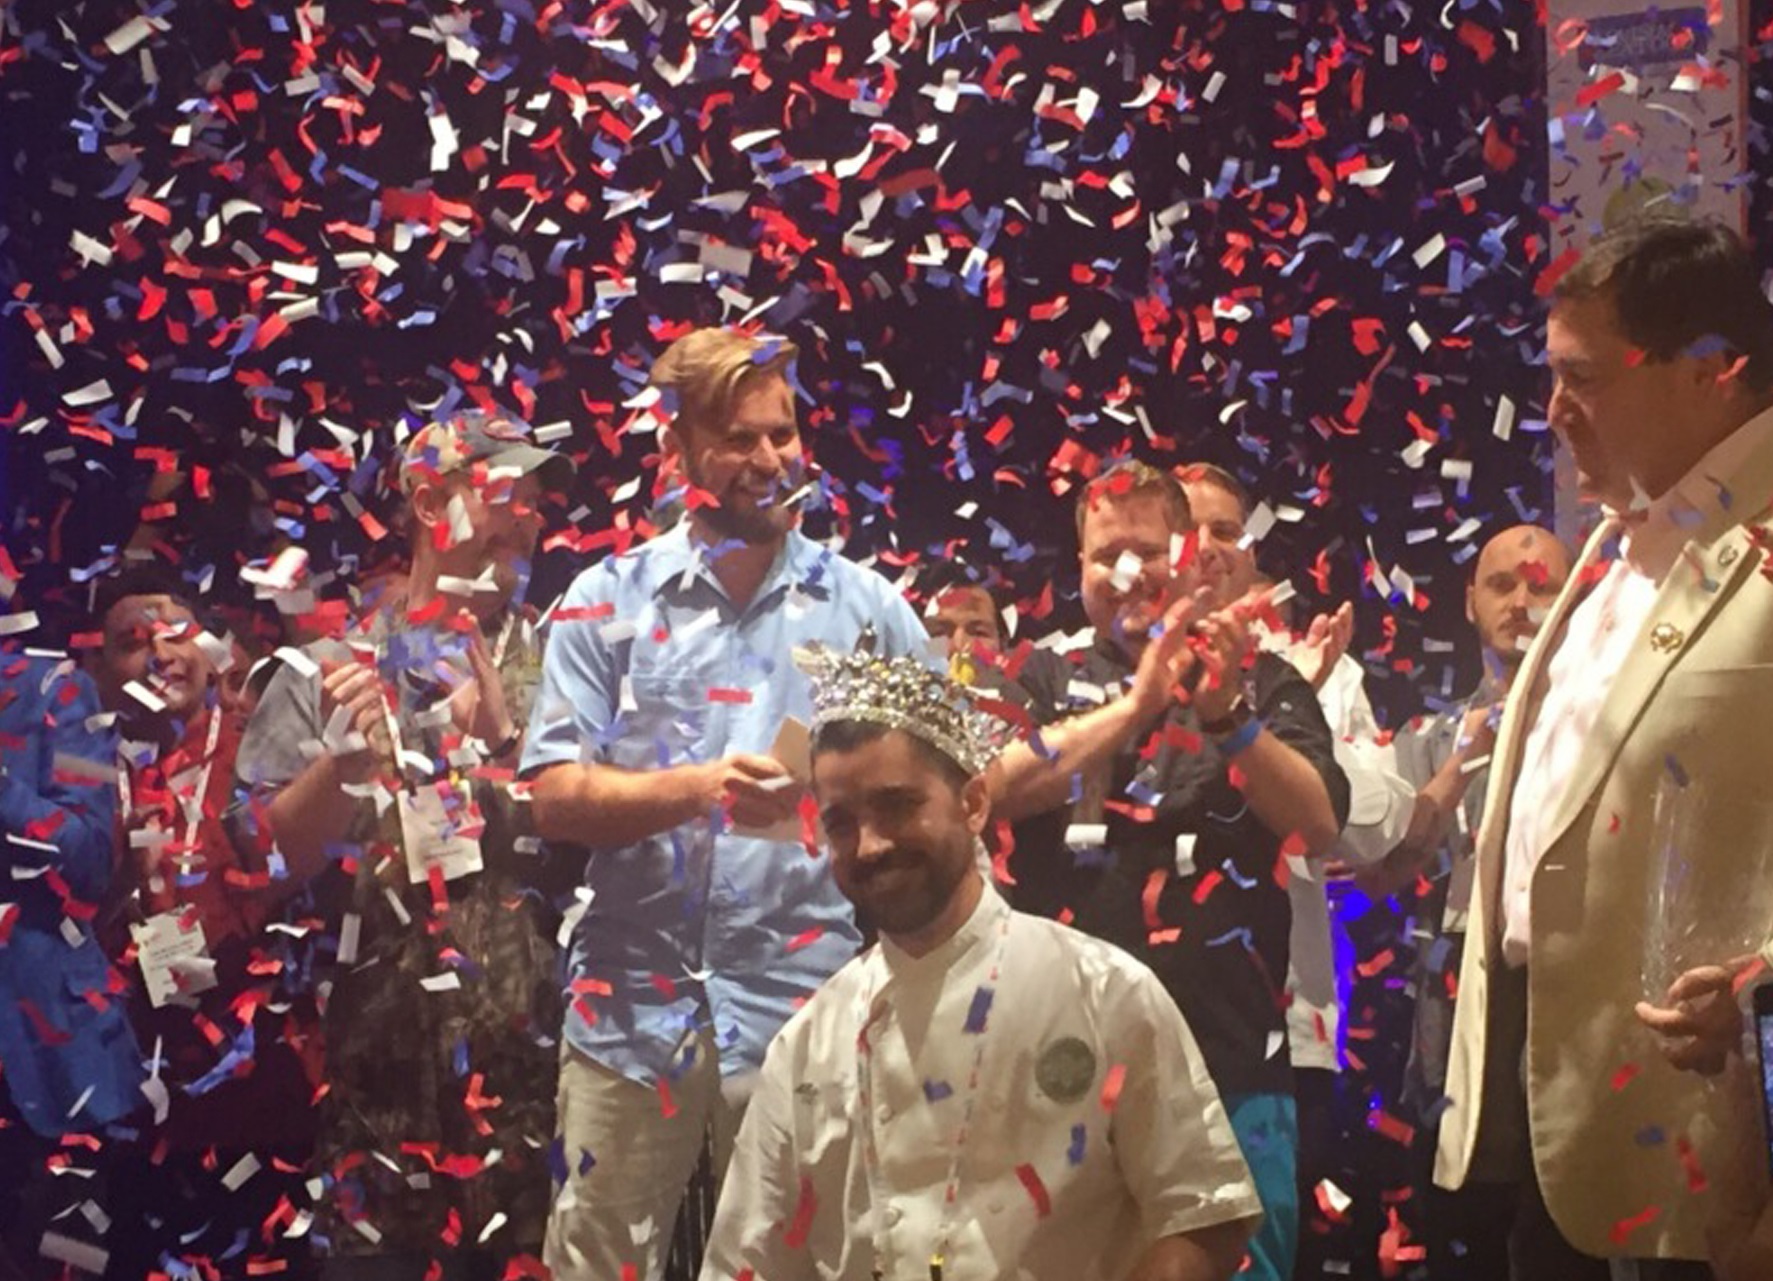 Mississippi's Chef Alex Eaton is Crowned the 2016 King of American Seafood